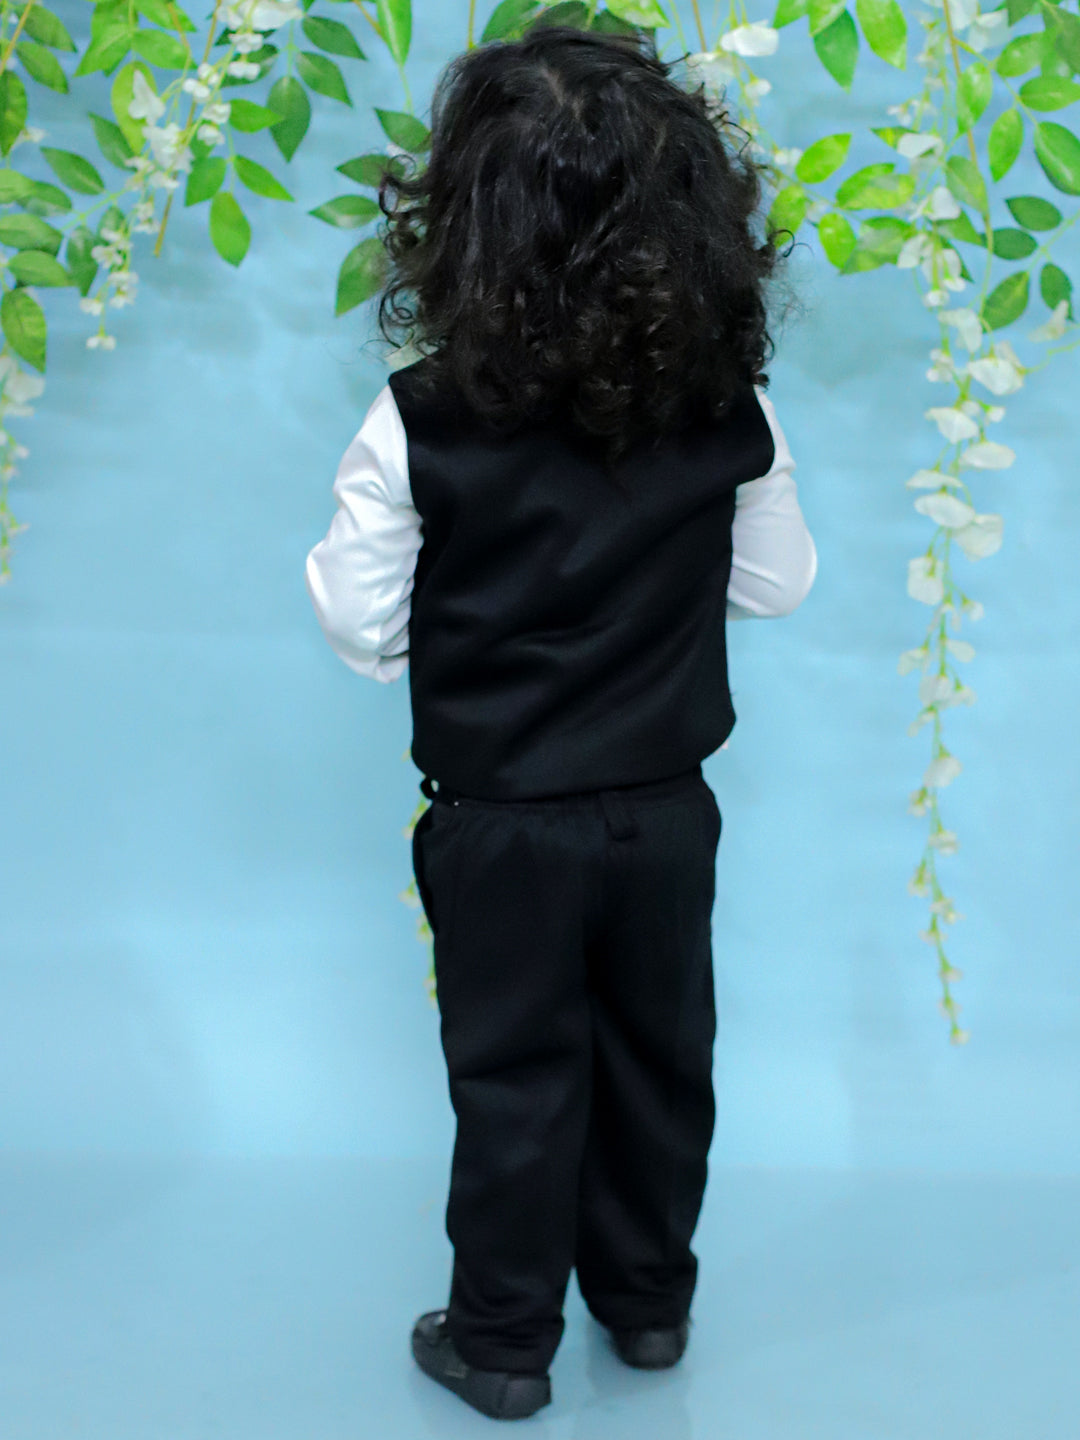 BownBee Pant Shirt Set with Waistcoat and Tie for Boys- Black